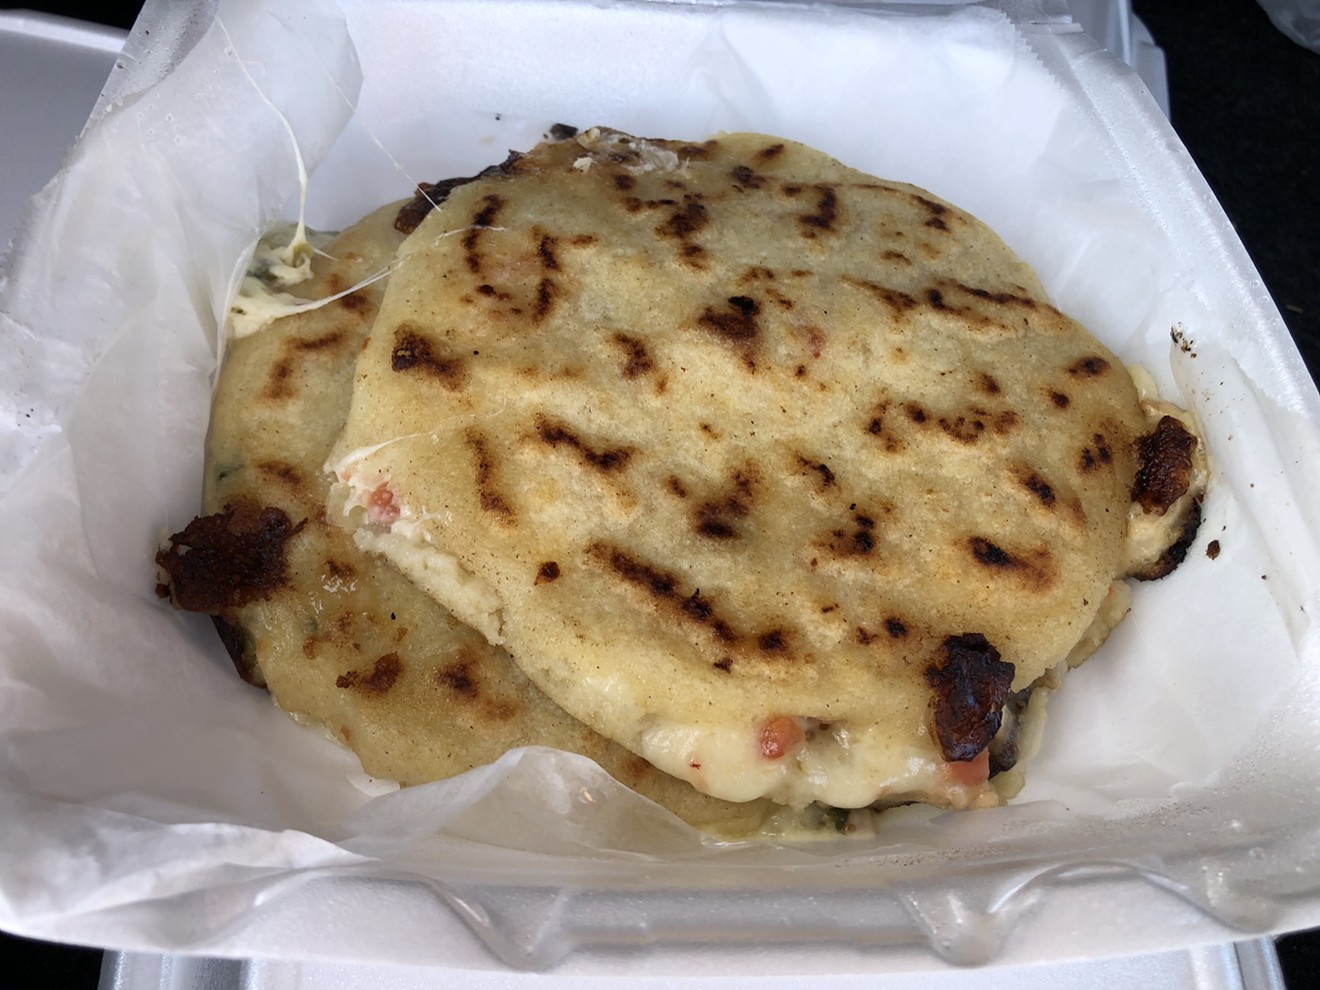 A pair of pupusas hot off the griddle and at their peak.